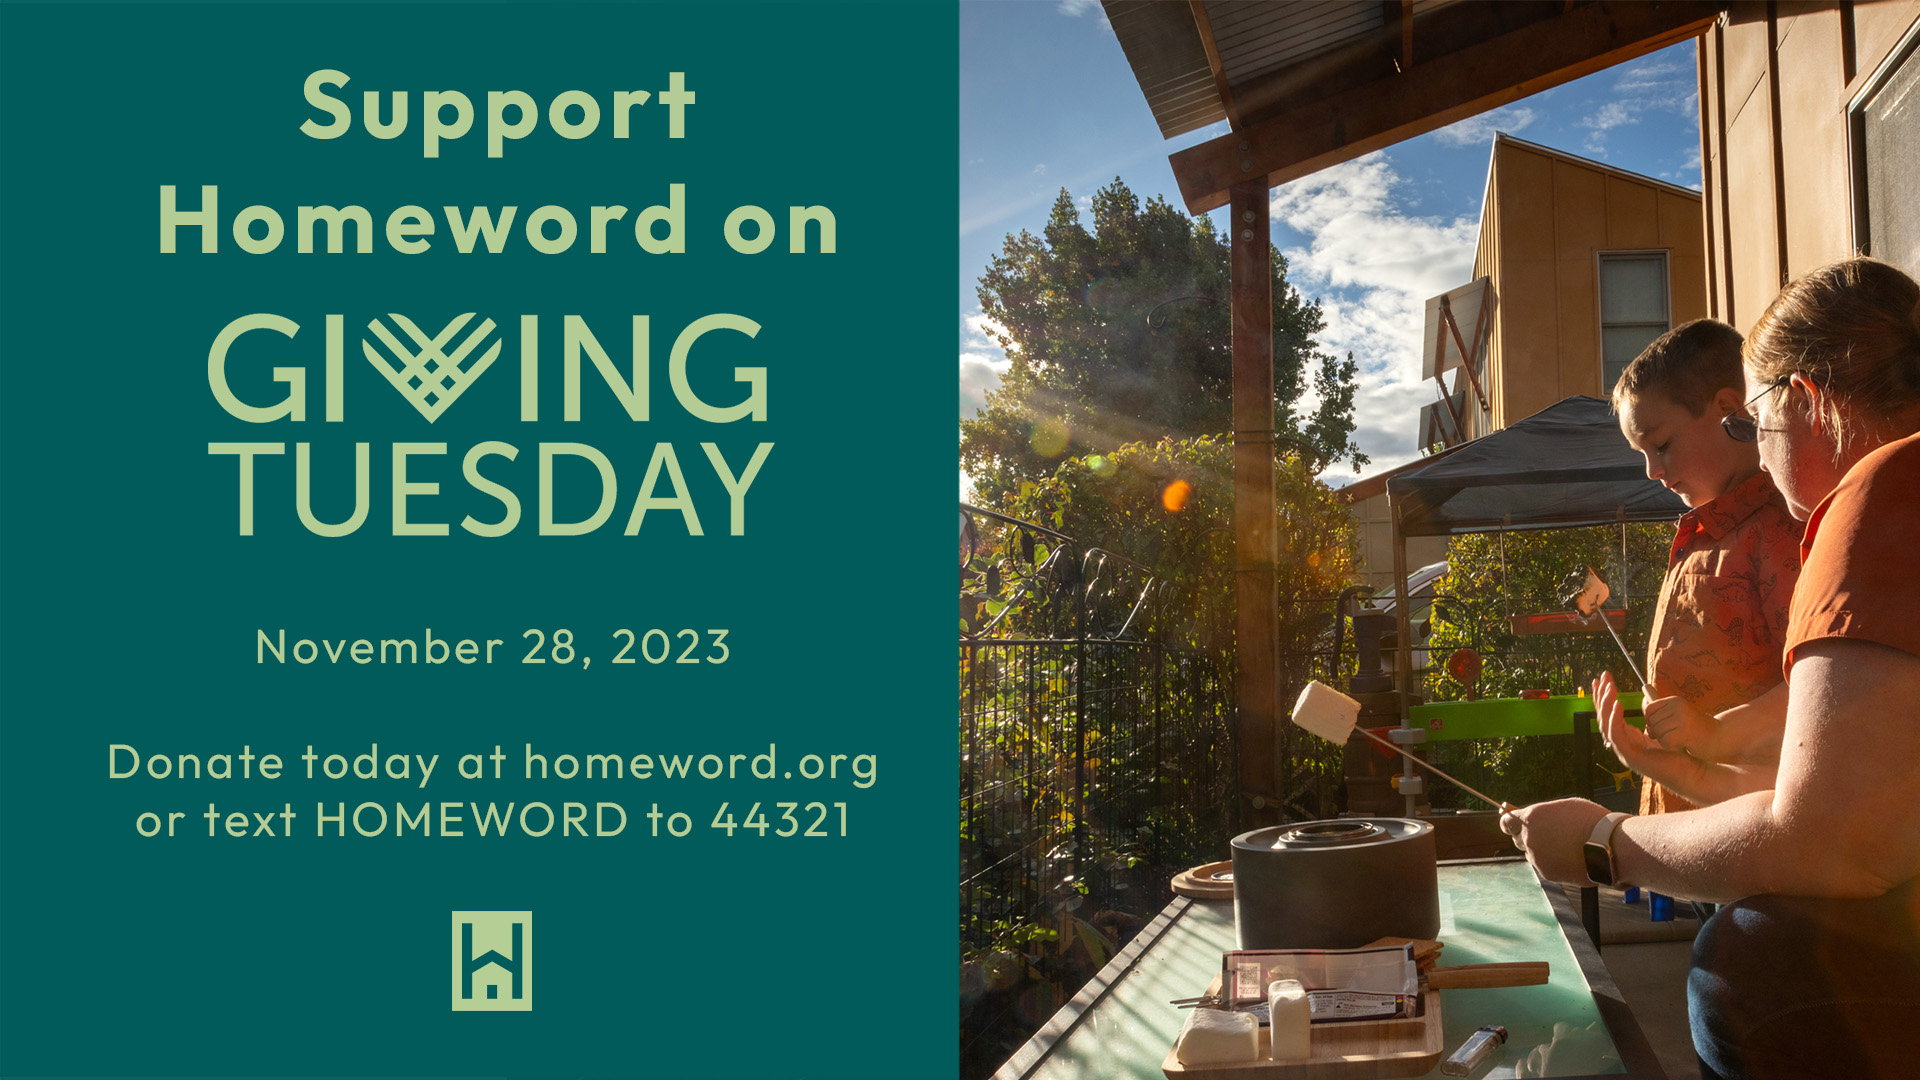 [4:06 PM] Andi Armstrong Support Homeword on Giving Tuesday - November 28, 2023 - Donate today at homeword.org or text HOMEWORD to 44321